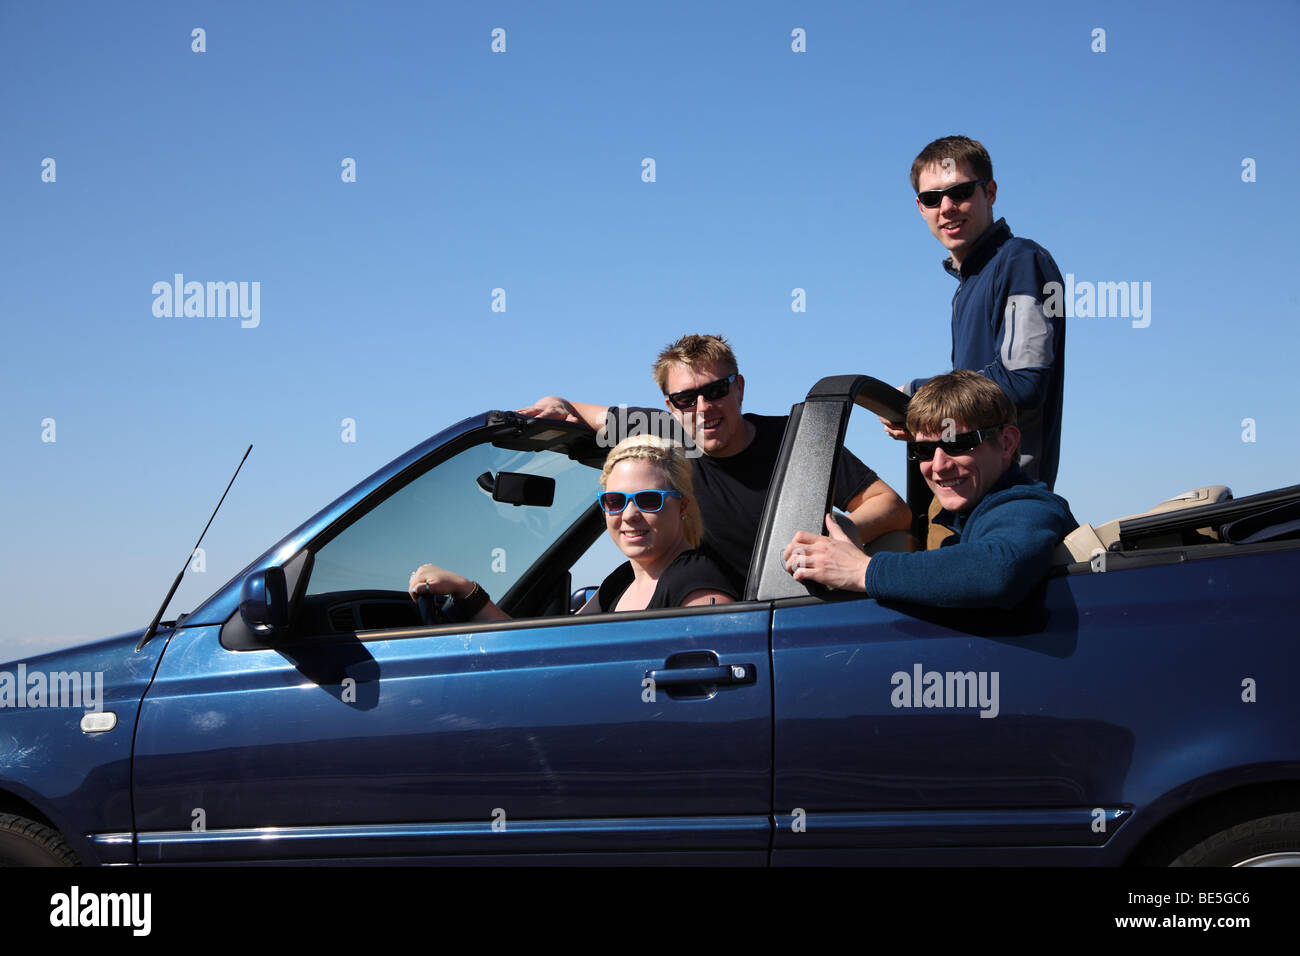 Group of young people in convertible car Stock Photo